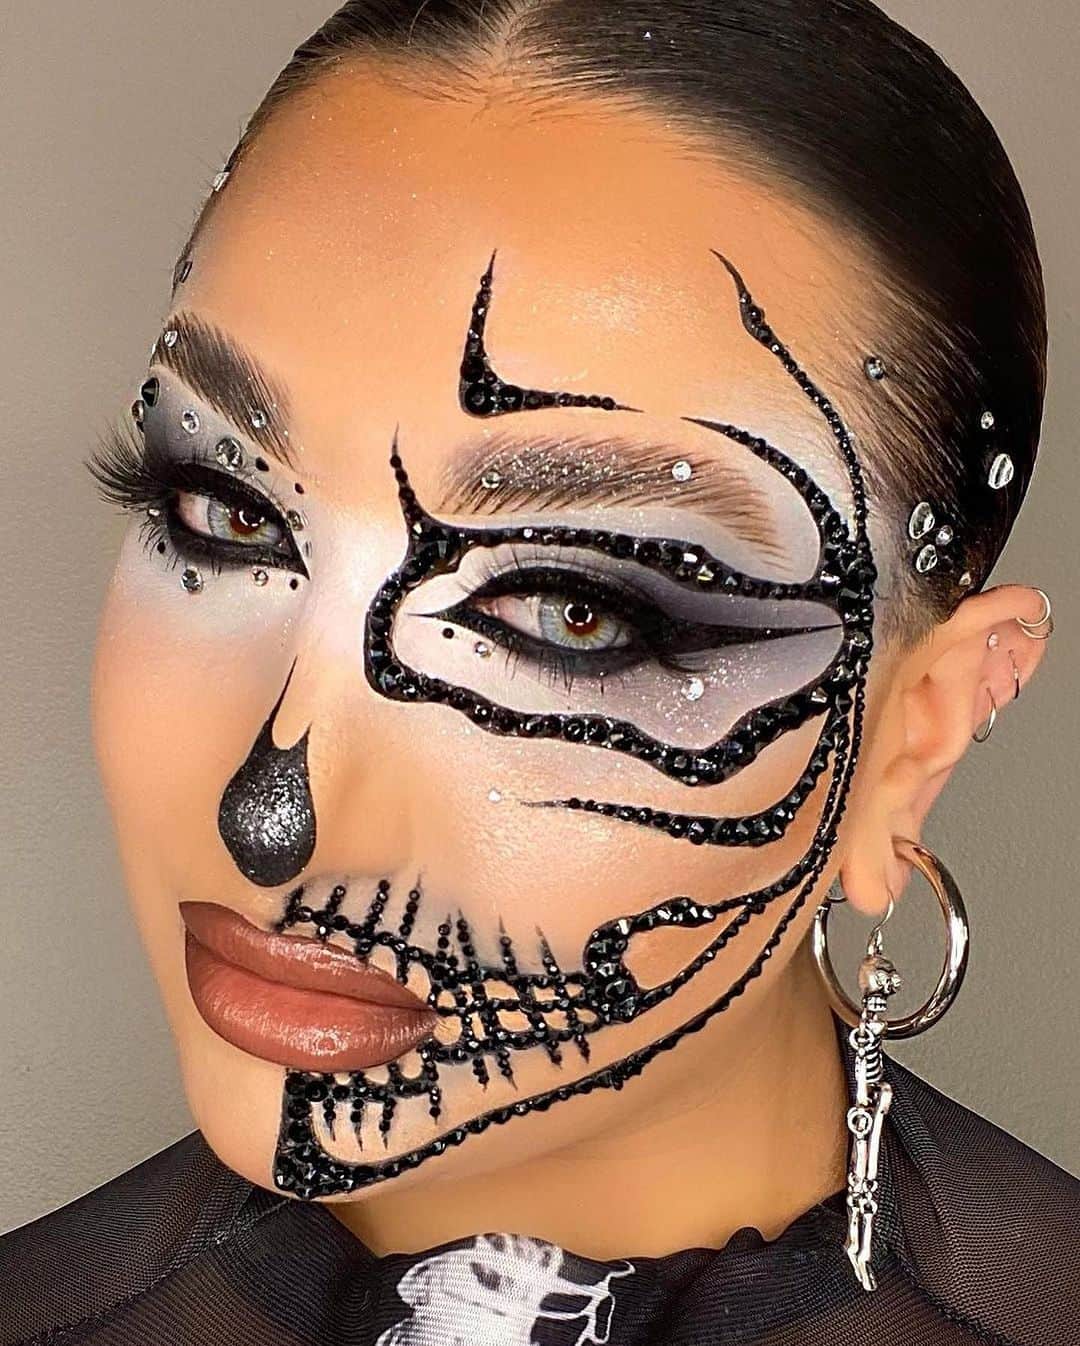 Milk Makeupのインスタグラム：「HAPPY #HYDROween Milk Fam! 👻 Just like that #HYDROween szn has come to a close 🧛‍♀️ But we couldn't leave October without one last round up... Swipe to see some scary good looks by our #MilkFam 🔒💦 See ya next year! 🖤  🖤 @lexilalamakeup (she/her) 🖤 @diegorrreyes (he/him) 🖤 @beautygurumo (she/her)  🖤 @rudyz_beauty_ (he/him) 🖤 @looksbylexielena (she/her)  🖤 @briannaruizmakeup (she/her) 🖤 @raydiatebyraychel (she/her)」